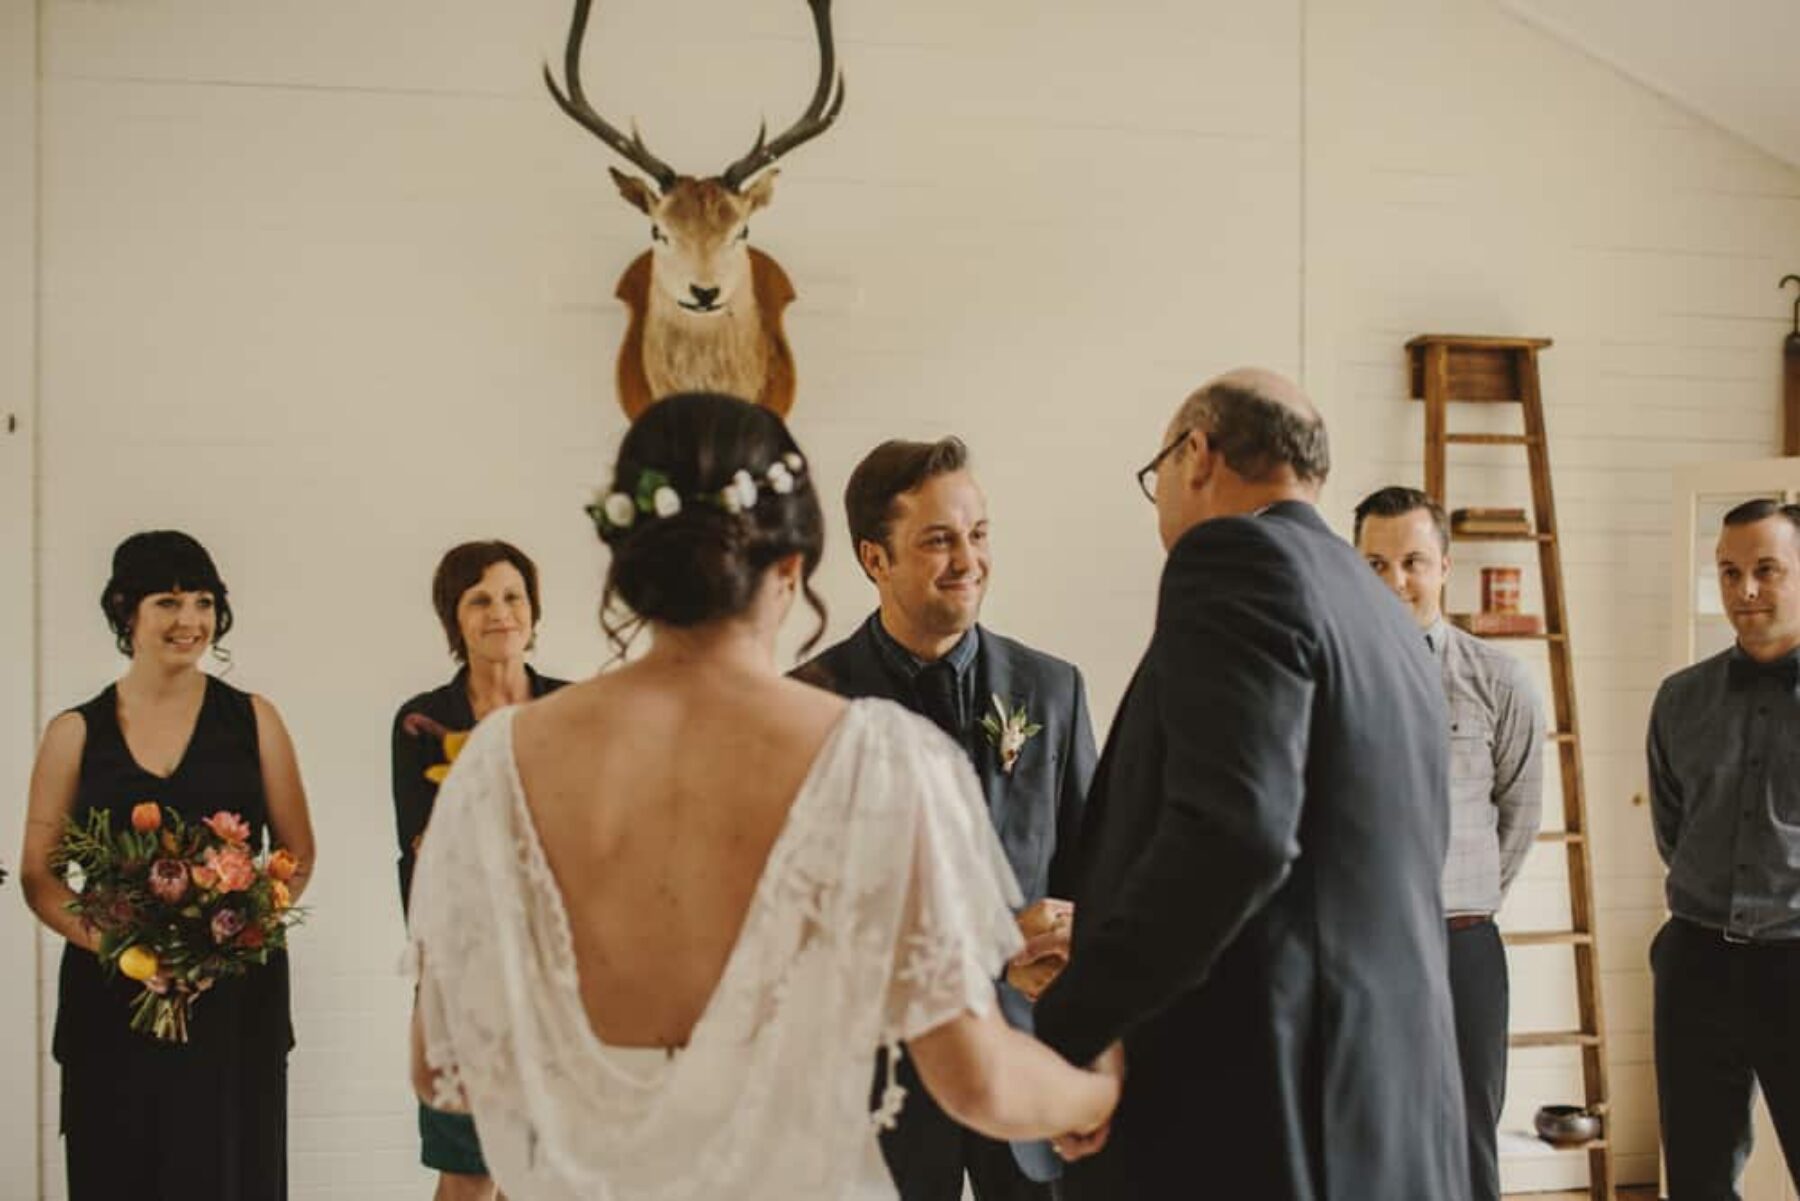 Old Forest School wedding - photography by Danelle Bohane